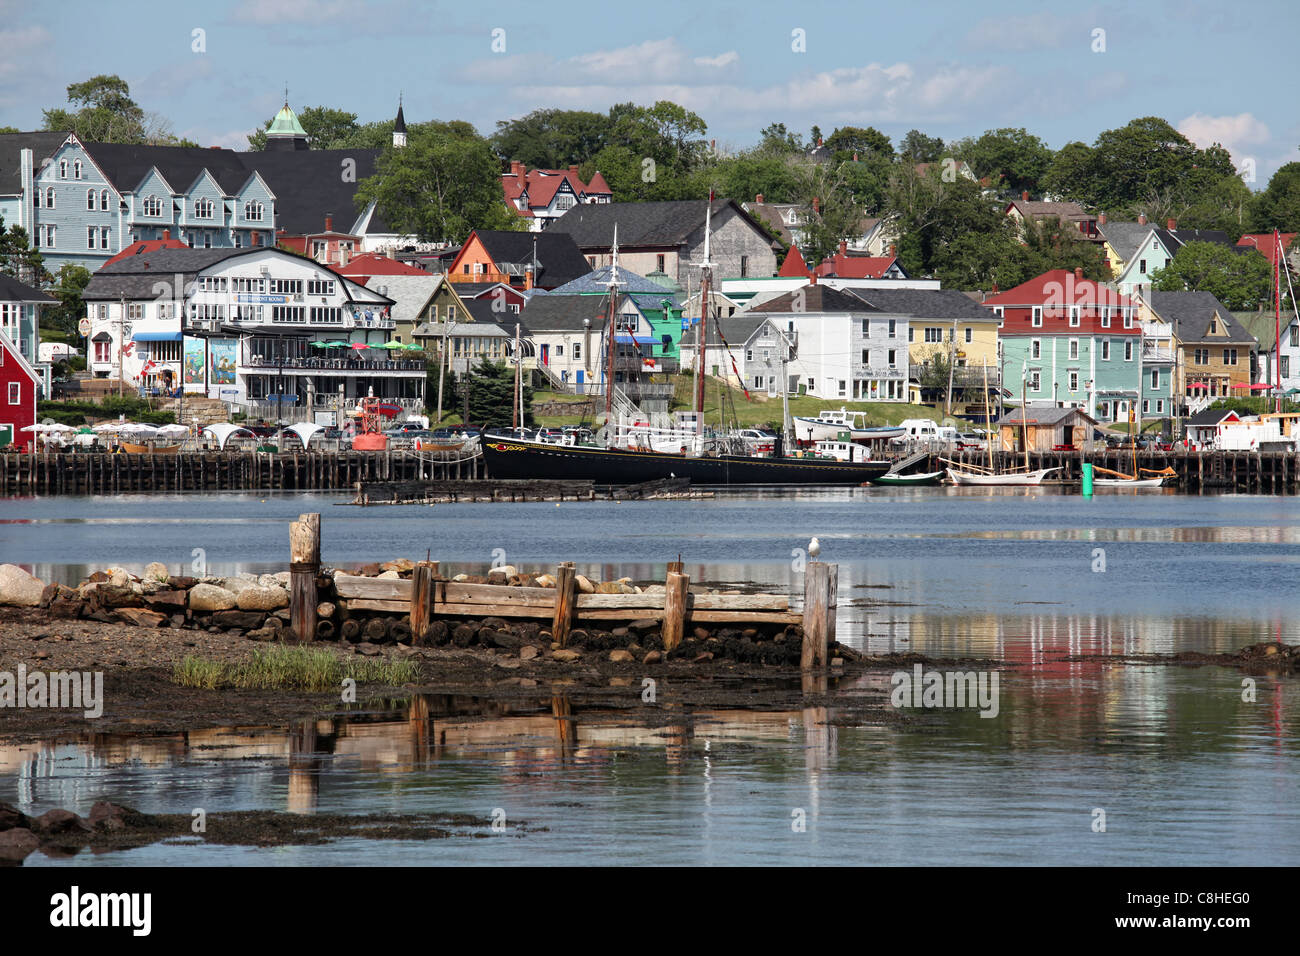 View of the harbour and waterfront of Lunenburg, Nova Scotia, Canada. v Stock Photo